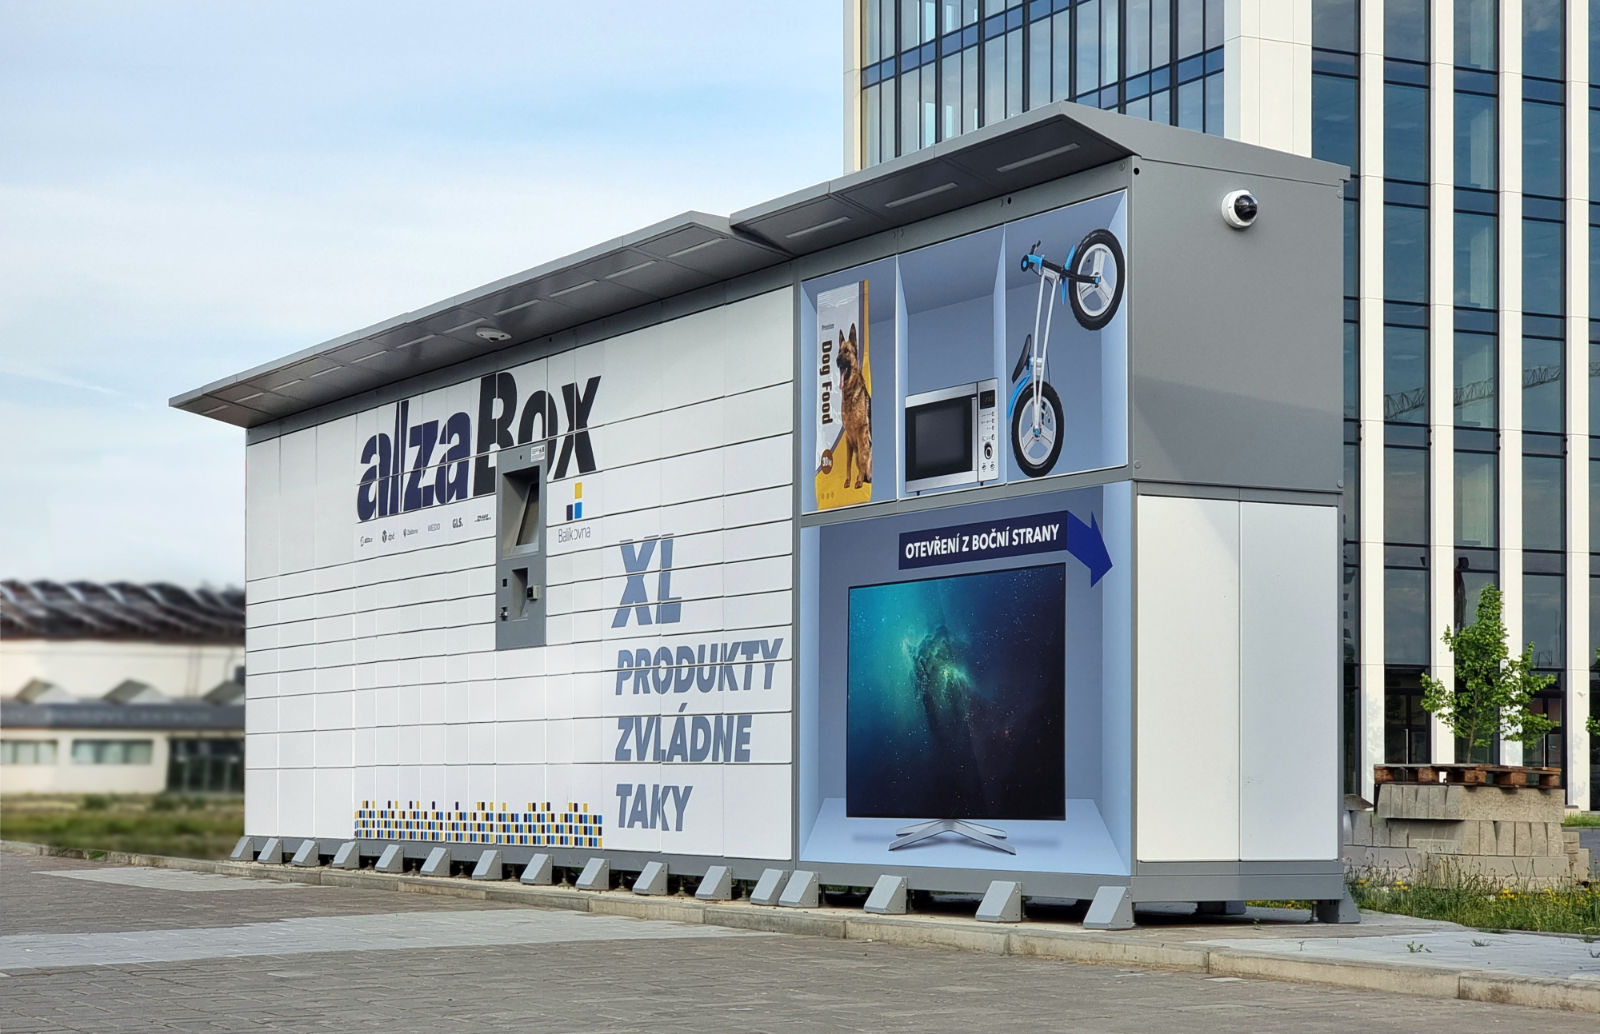 AlfaBOX parcel delivery station with an extension for the delivery of large parcels and tv sets.